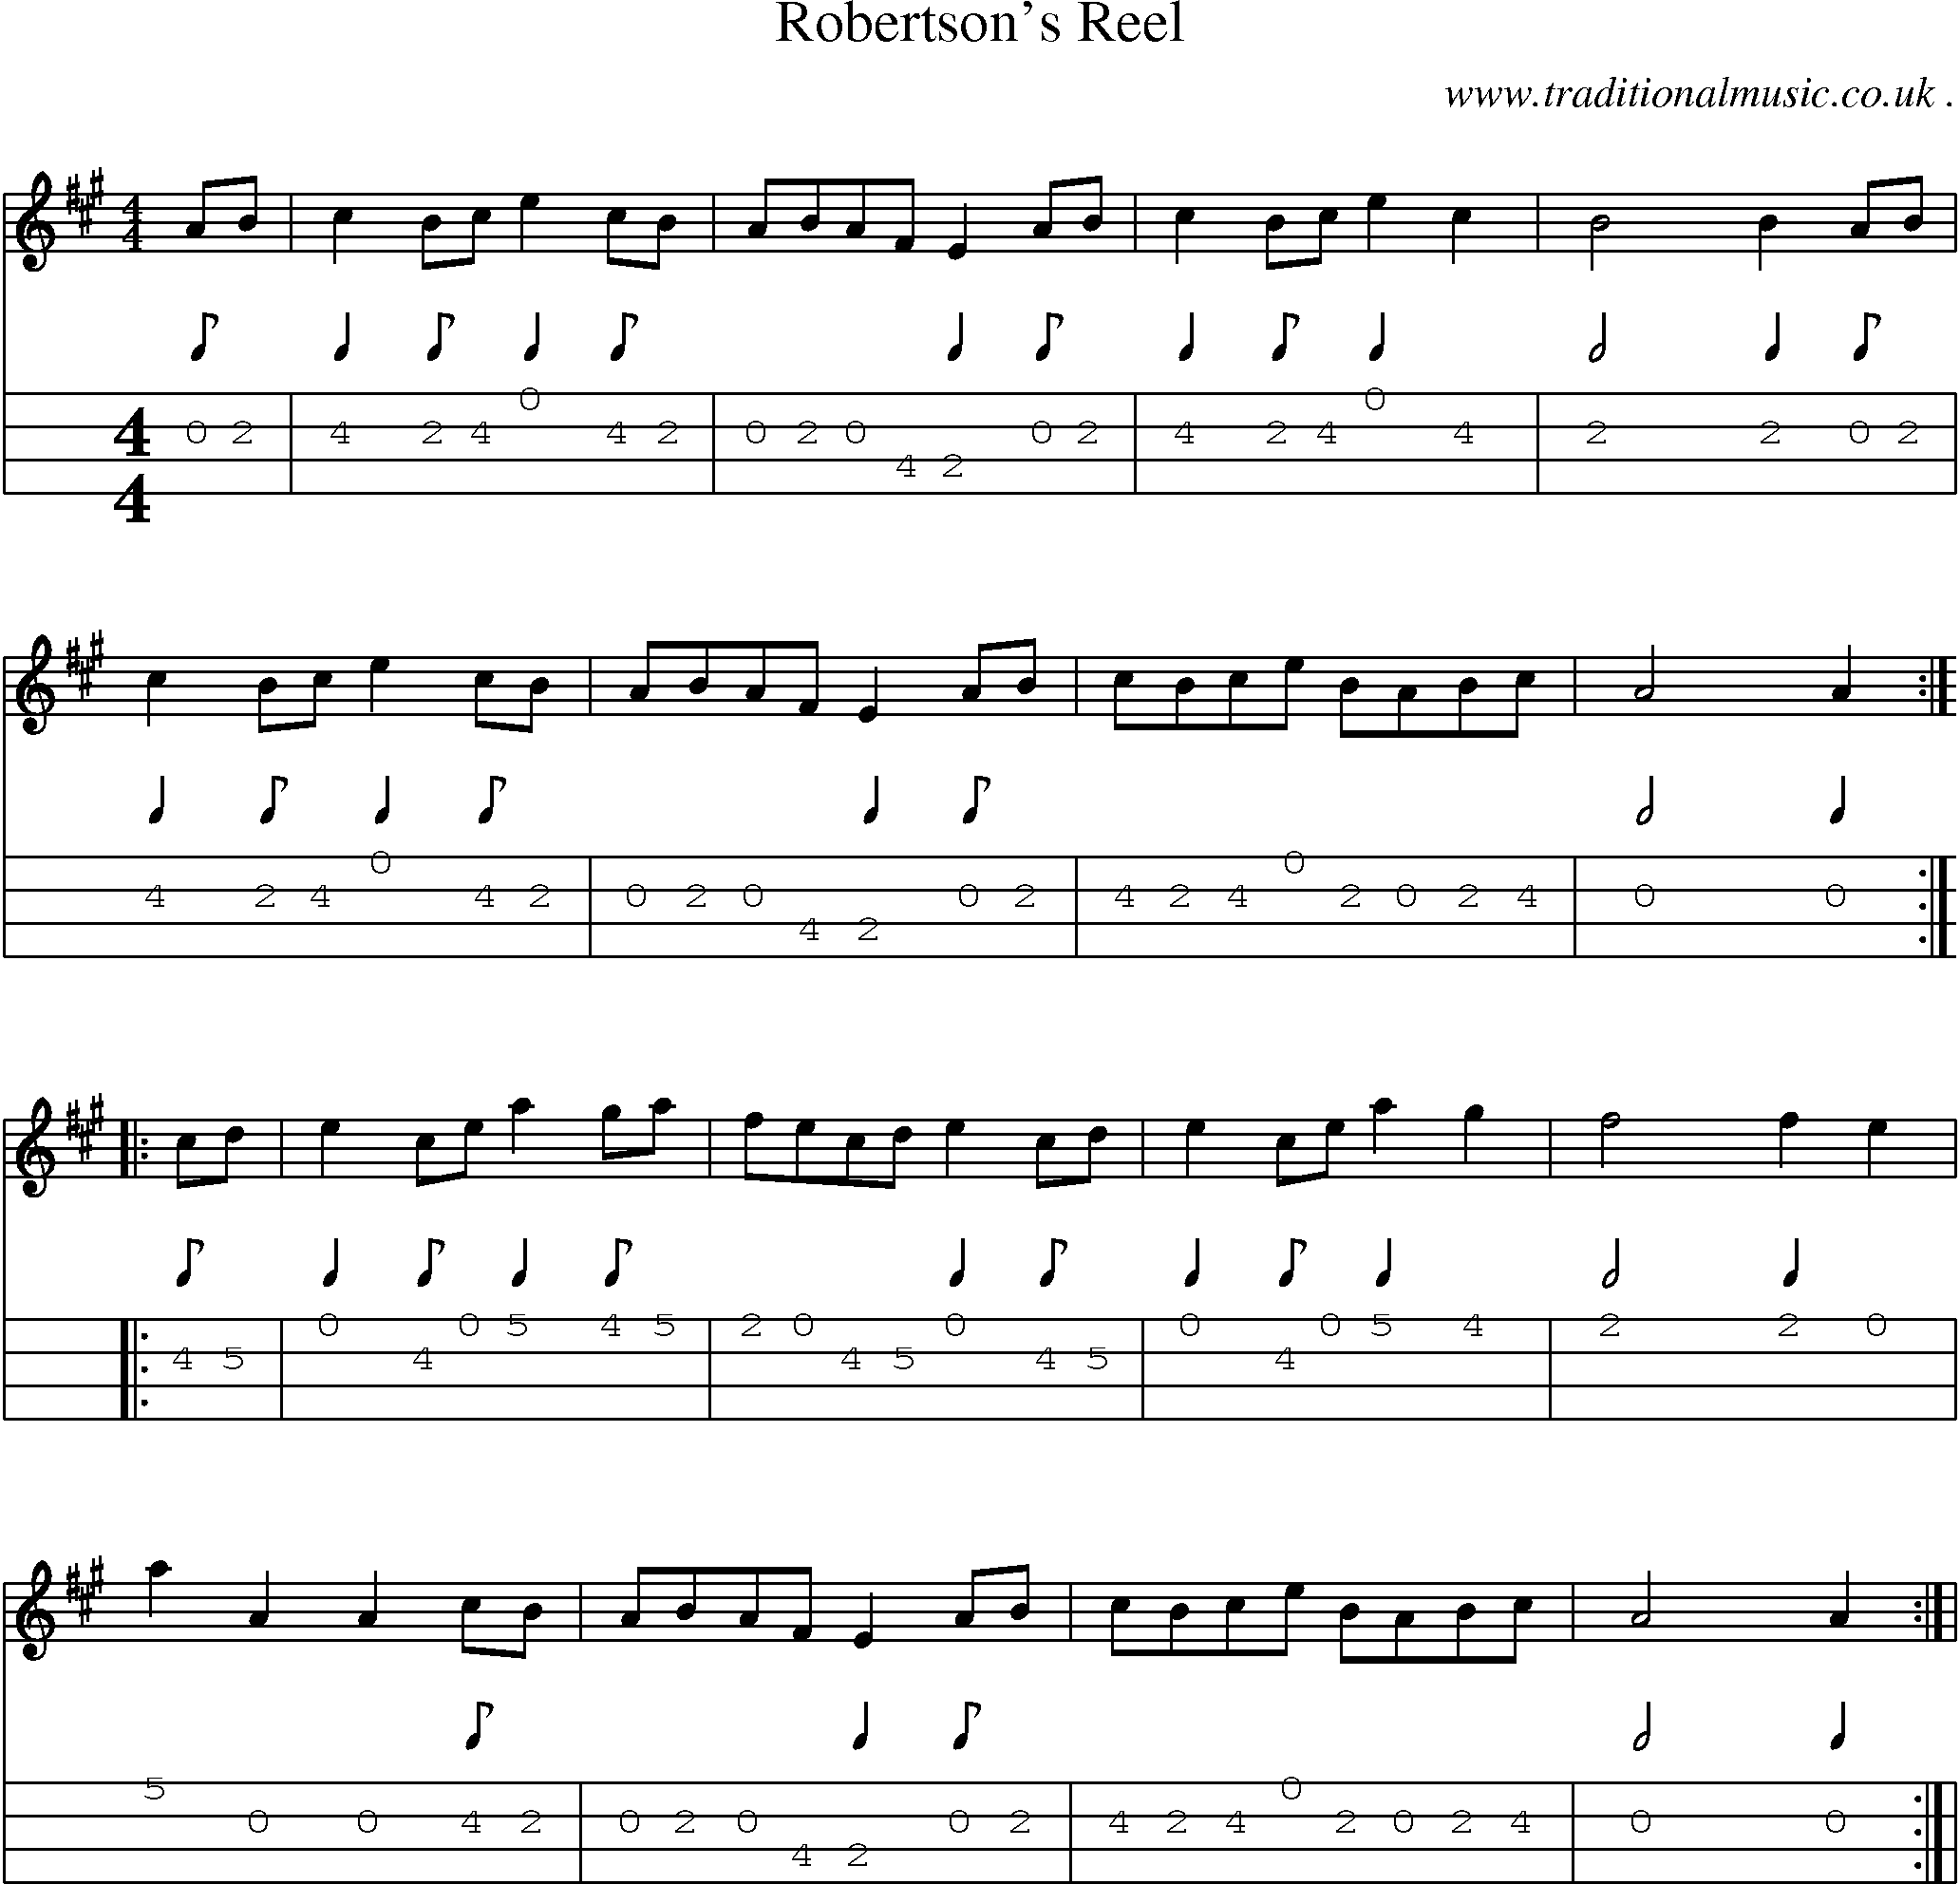 Sheet-Music and Mandolin Tabs for Robertsons Reel